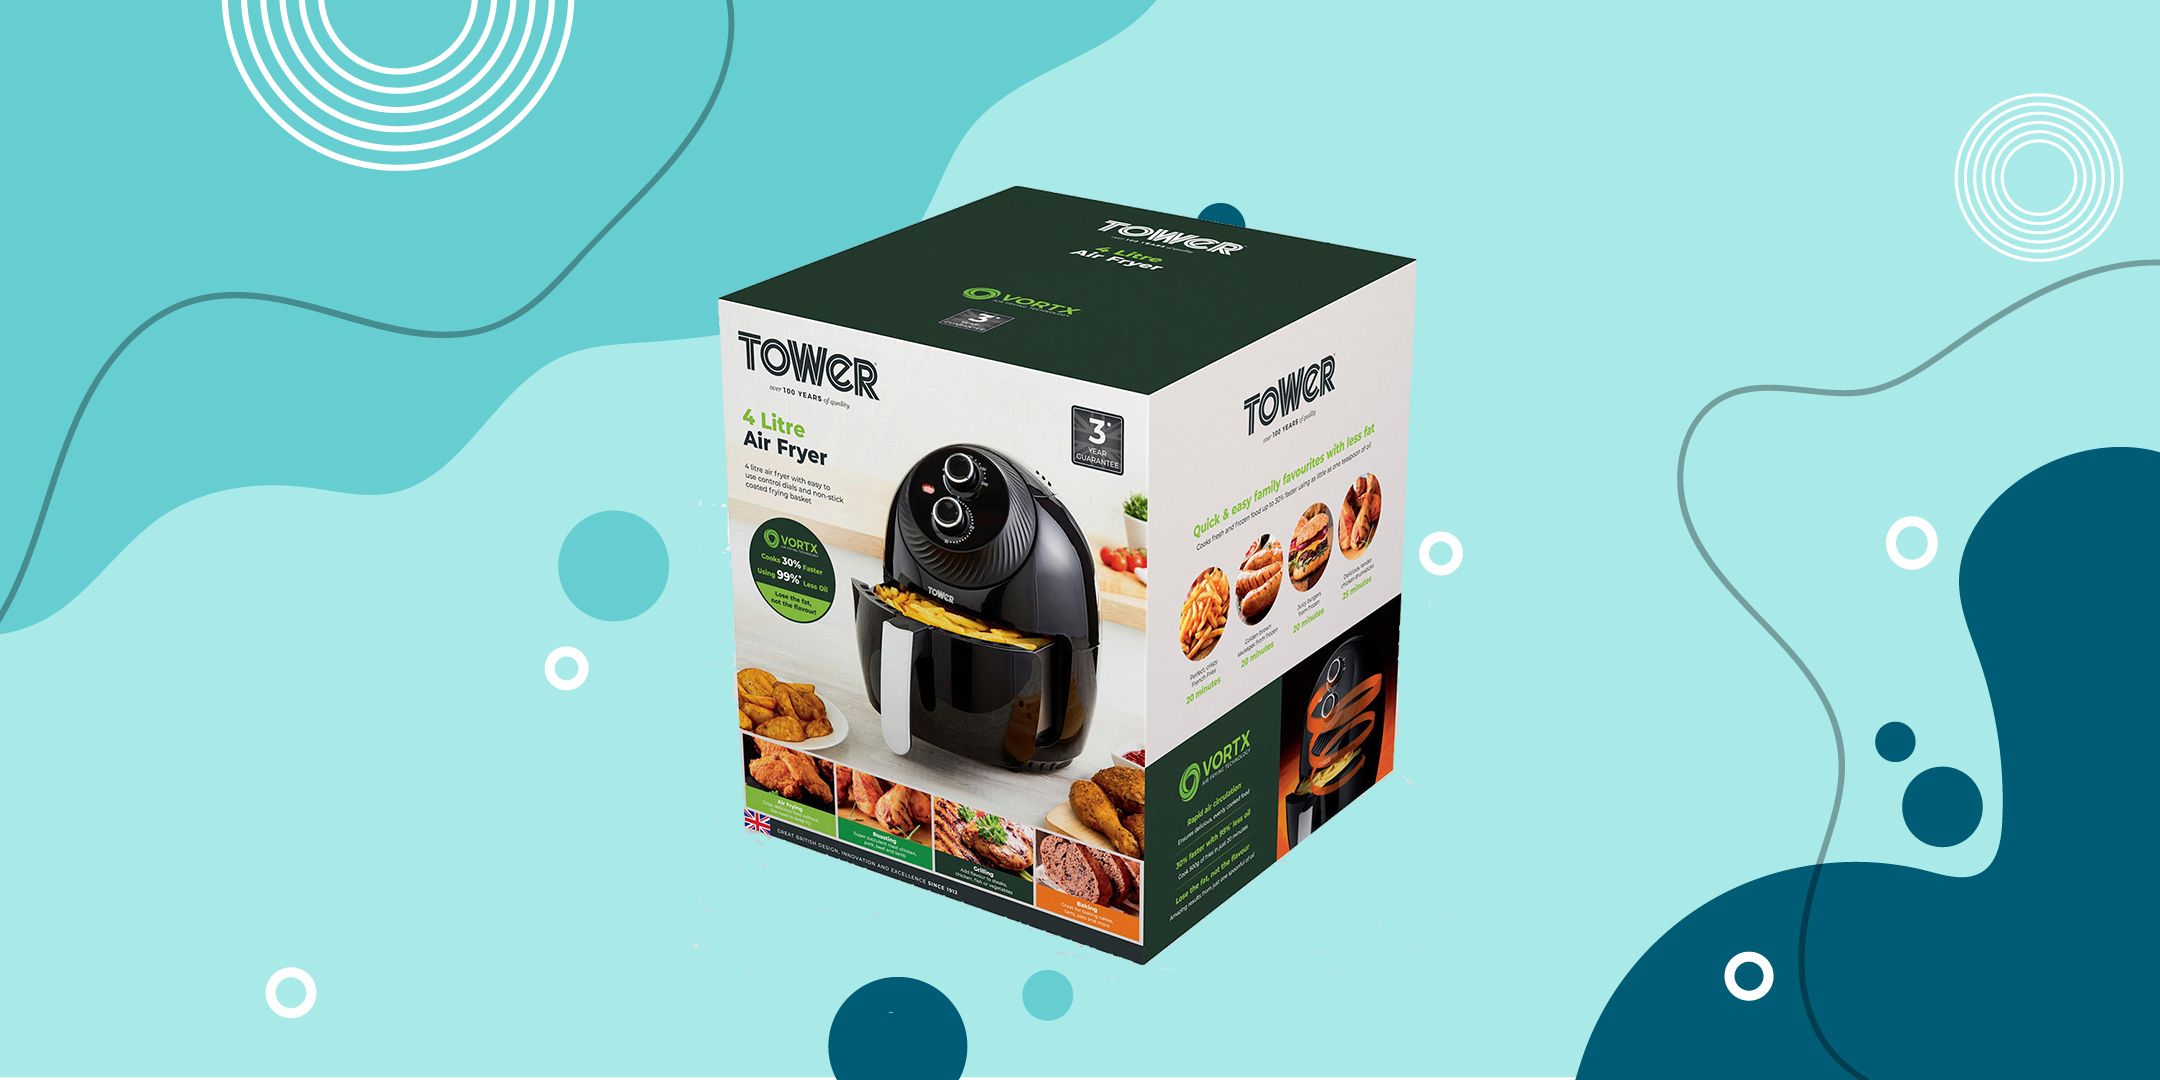 Tower's sell-out air fryer that helps 'save on energy' has had its